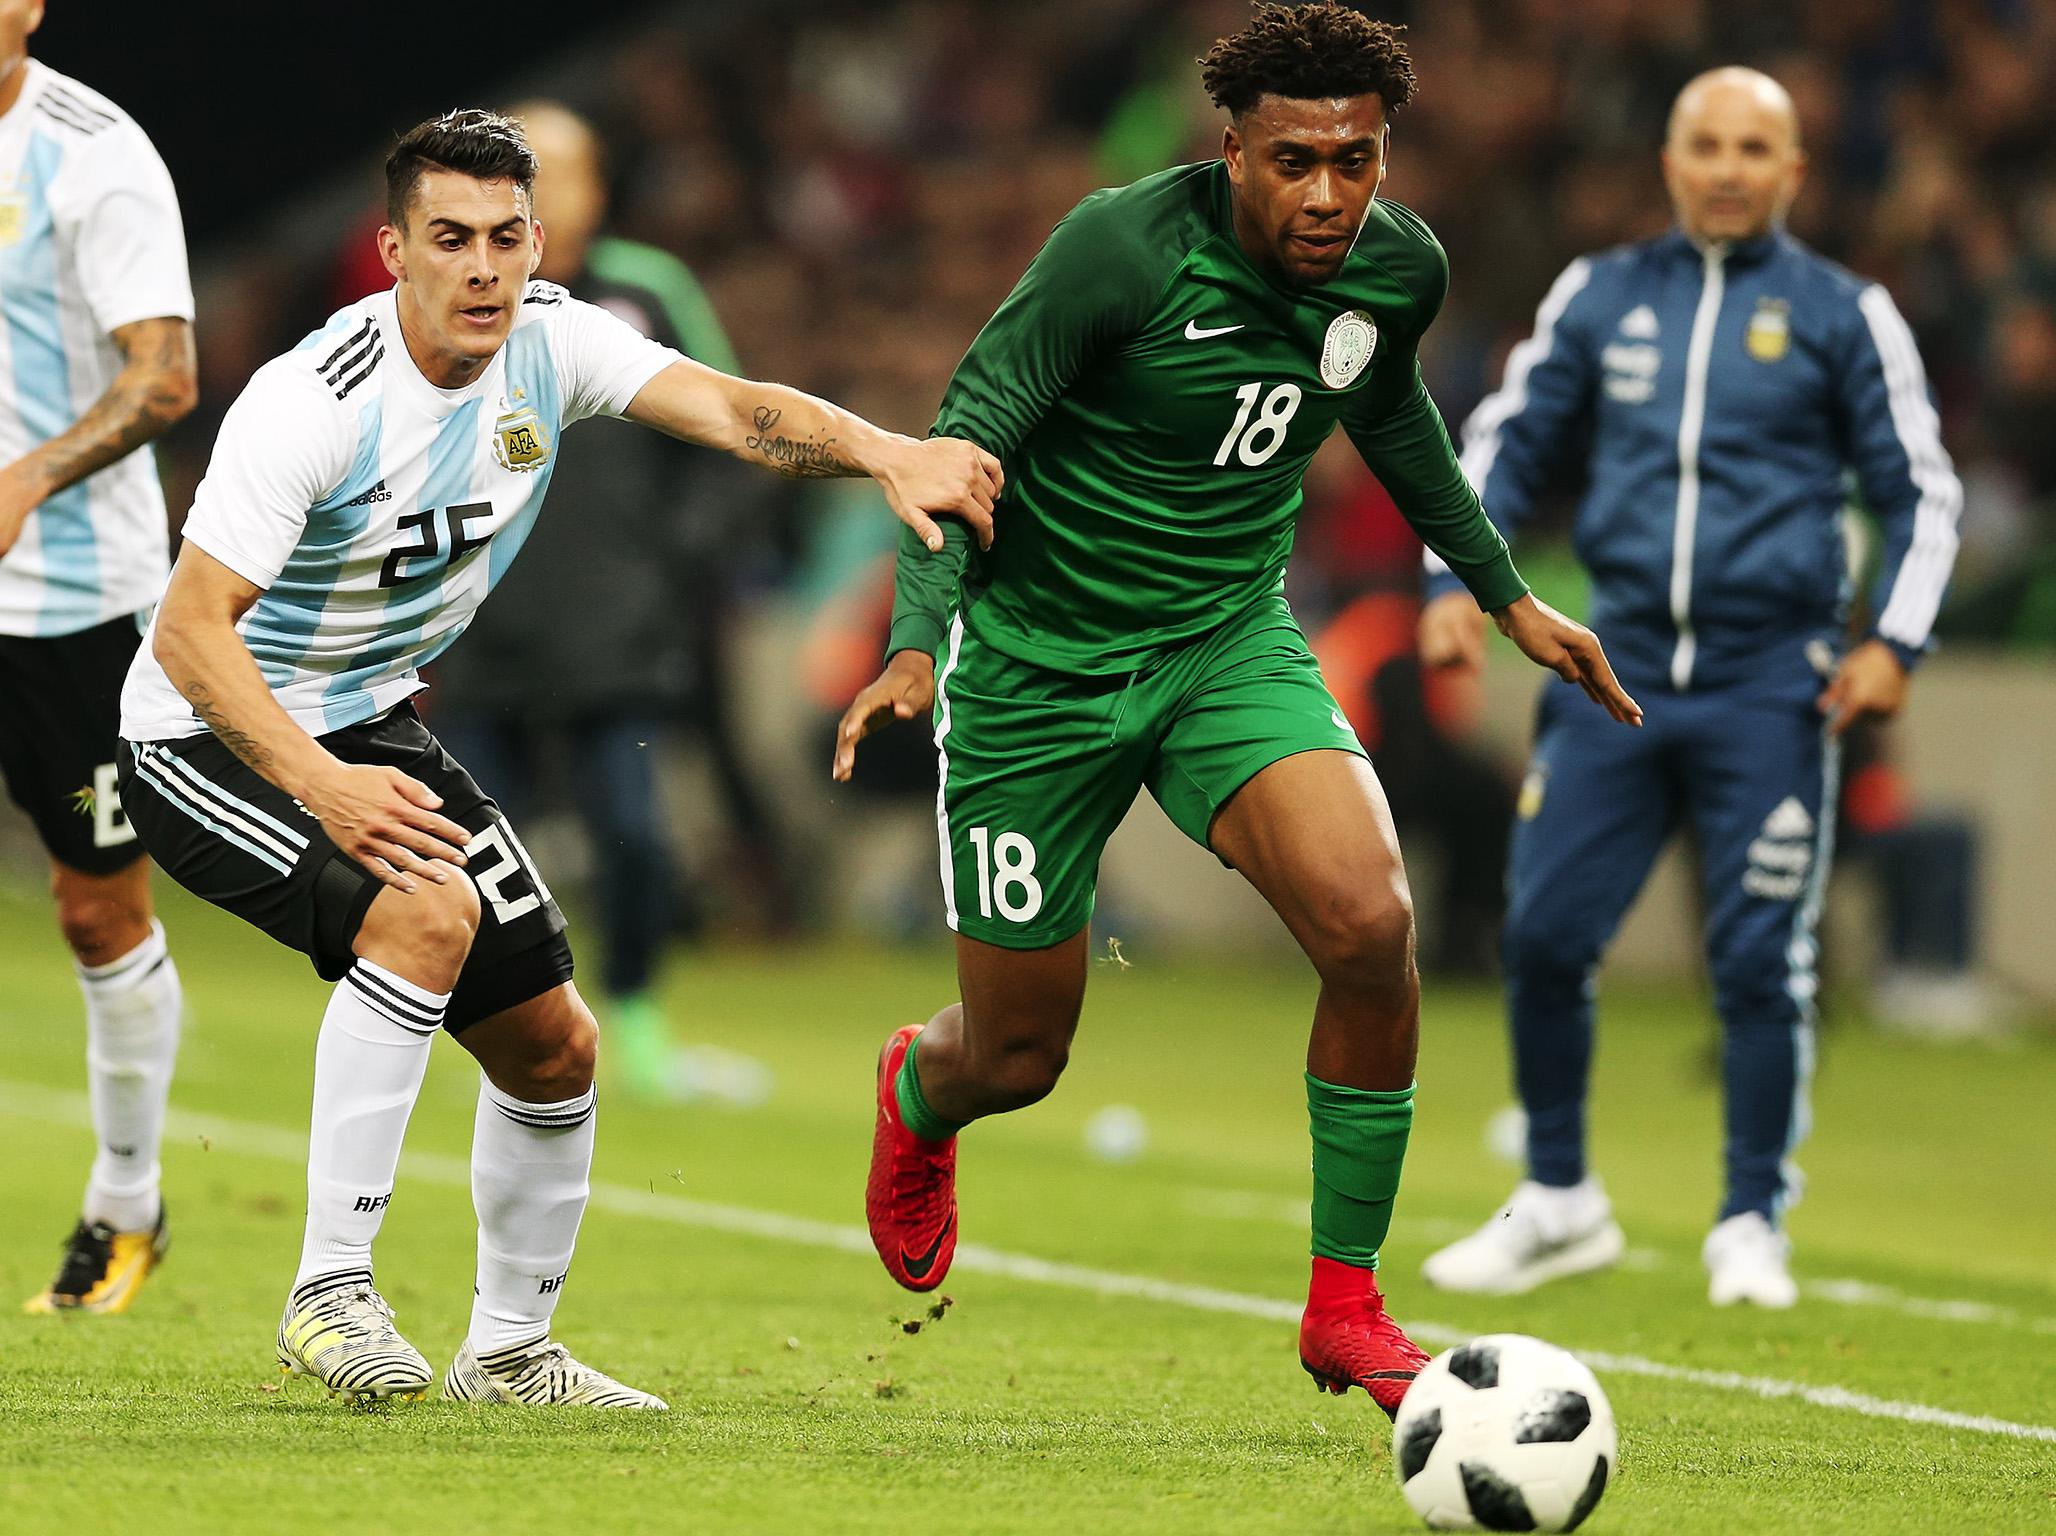 Nigeria to start with strongest XI in World Cup warm-up against England including Alex Iwobi and Victor Moses